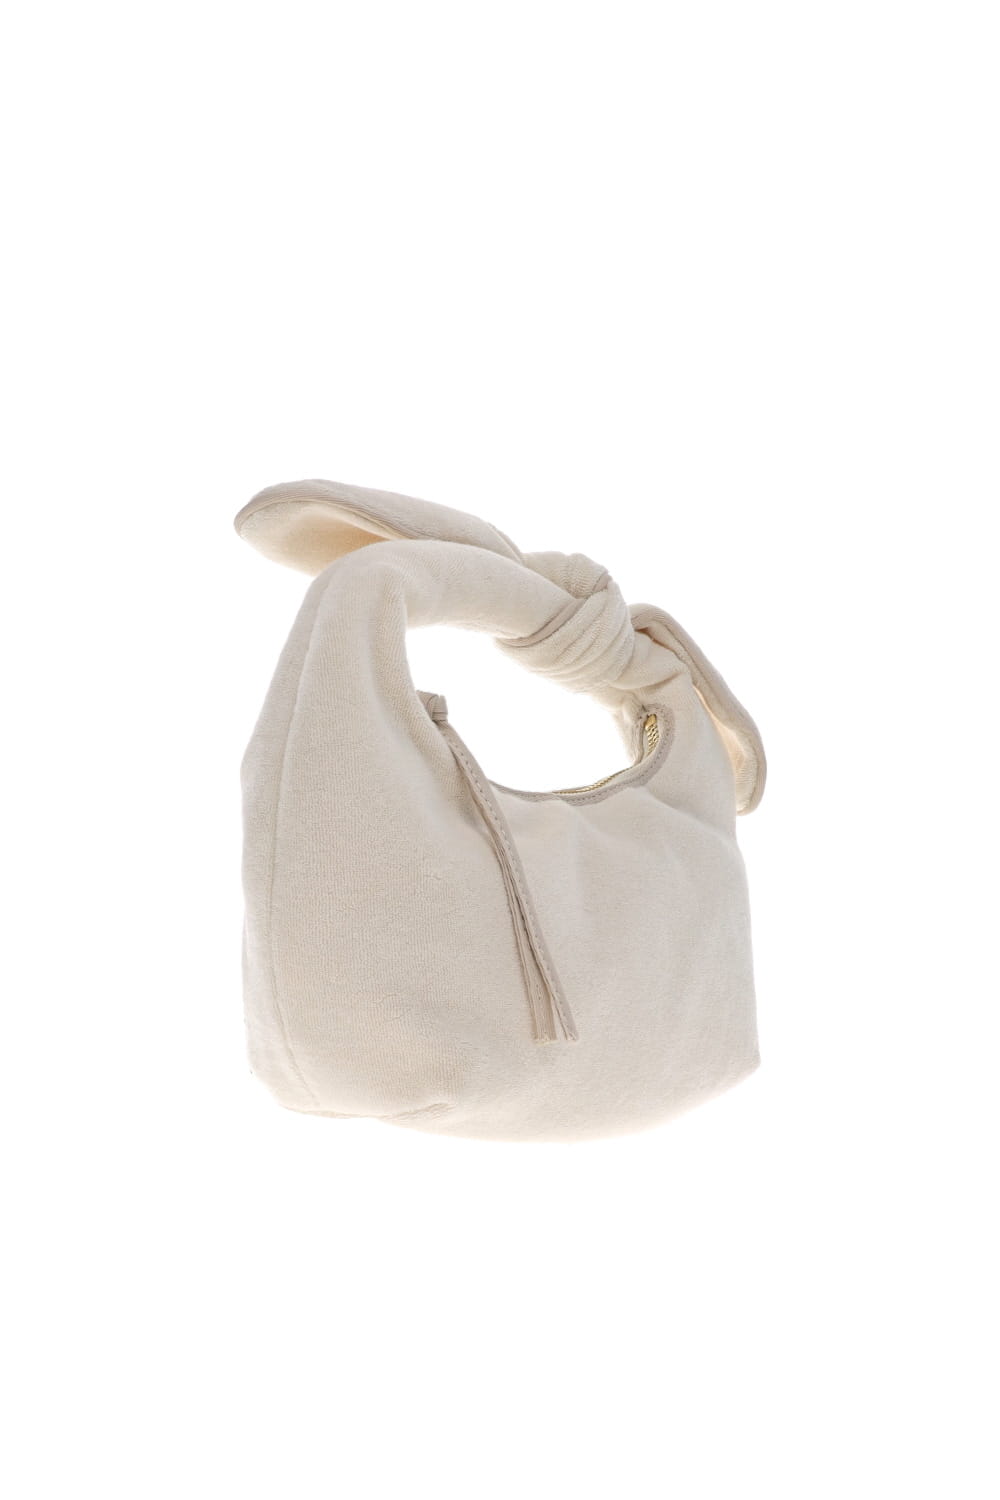 POOLSIDE The Josie Knot Ivory Terry Top Handle Bag